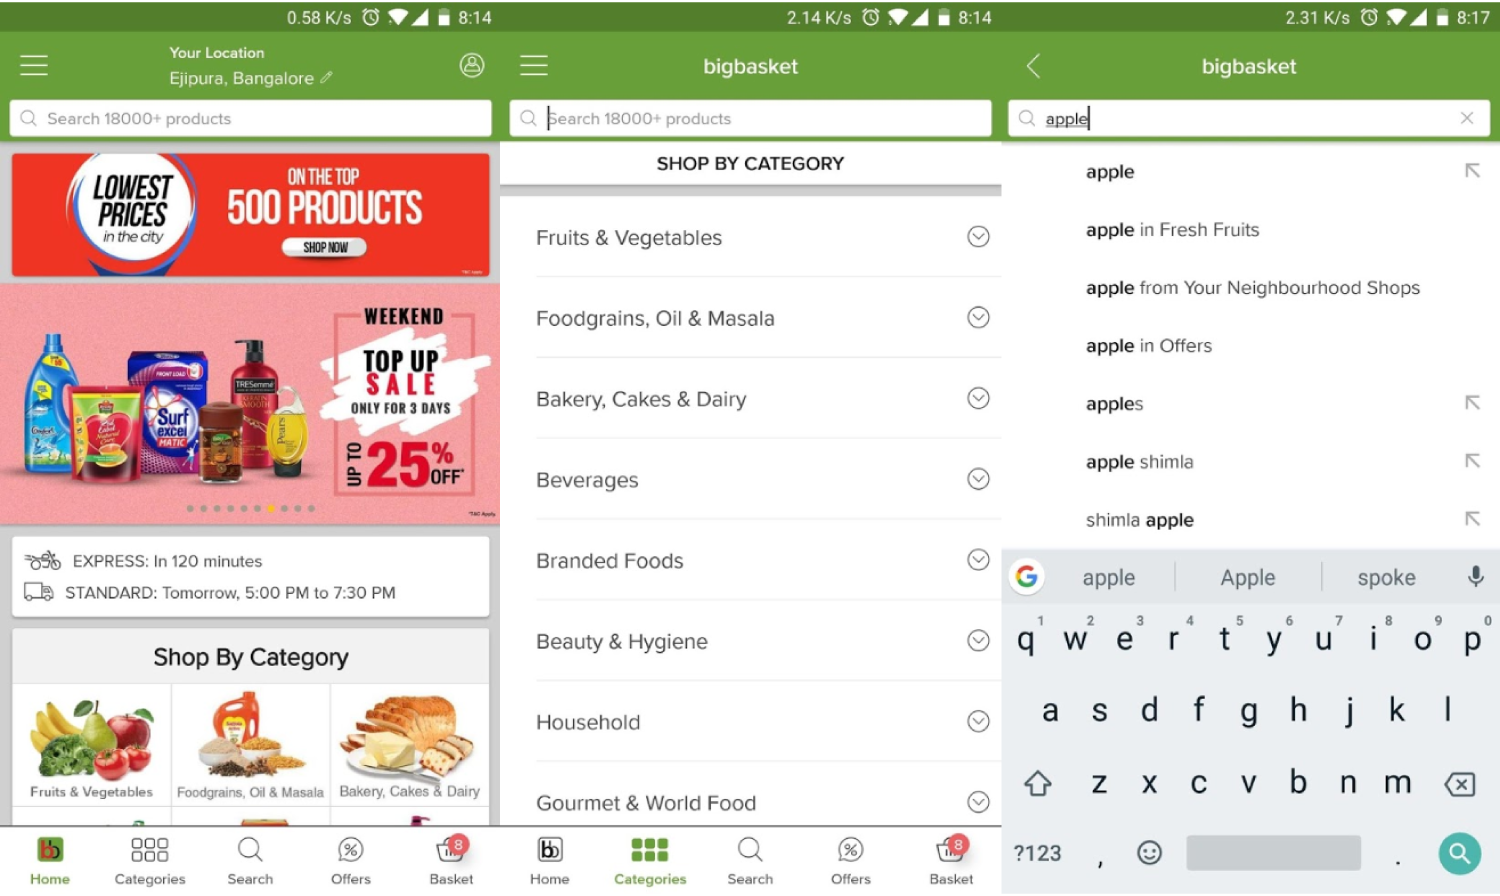 6 Best Online Grocery Shopping Apps In India For Android ...